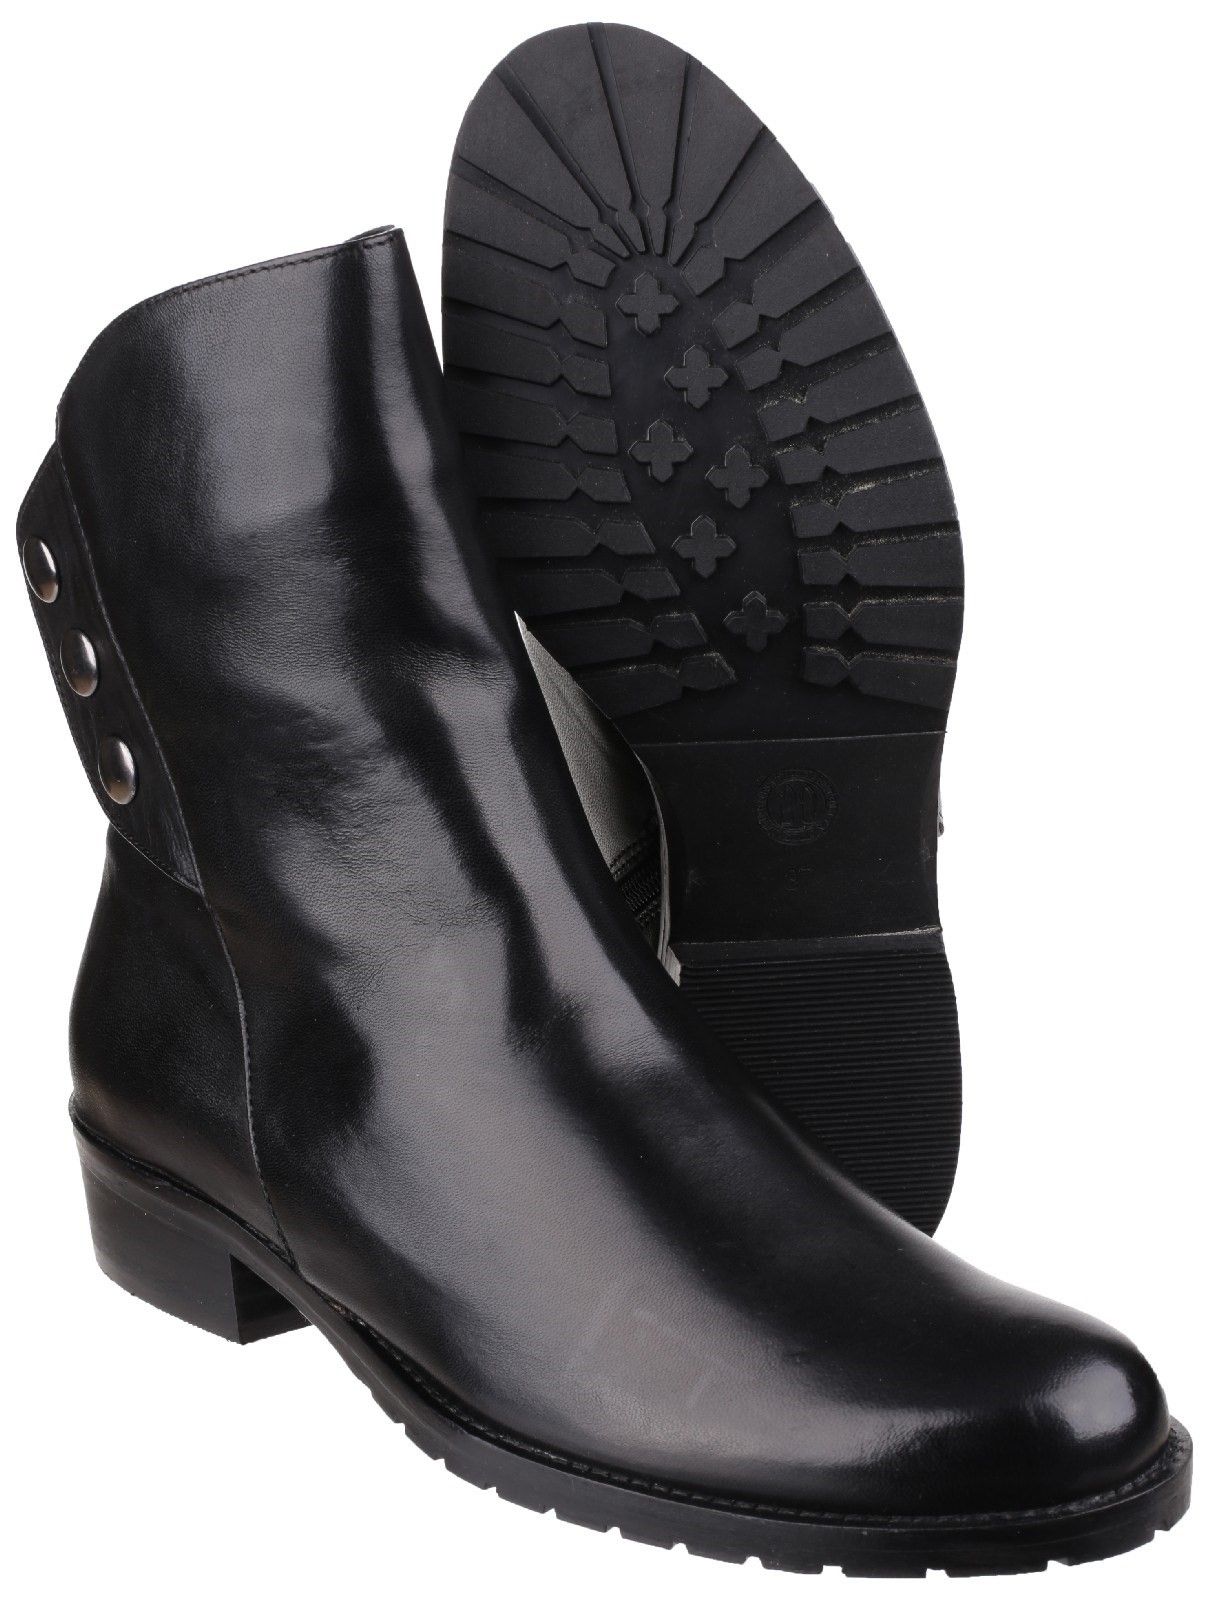 Riva brings classic Italian style with a twist with the Buttons leather dress boot. Crafted with asymmetric lines and stylish button detail. A mid-height block heel gives timeless elegance.Buttons is a stylish ankle boot from 'Riva'. 
Featuring a flap over cuff at the front of the ankle. 
popper buttons design on outer. 
Zip fastening for a easy fit. 
Full leather outer.